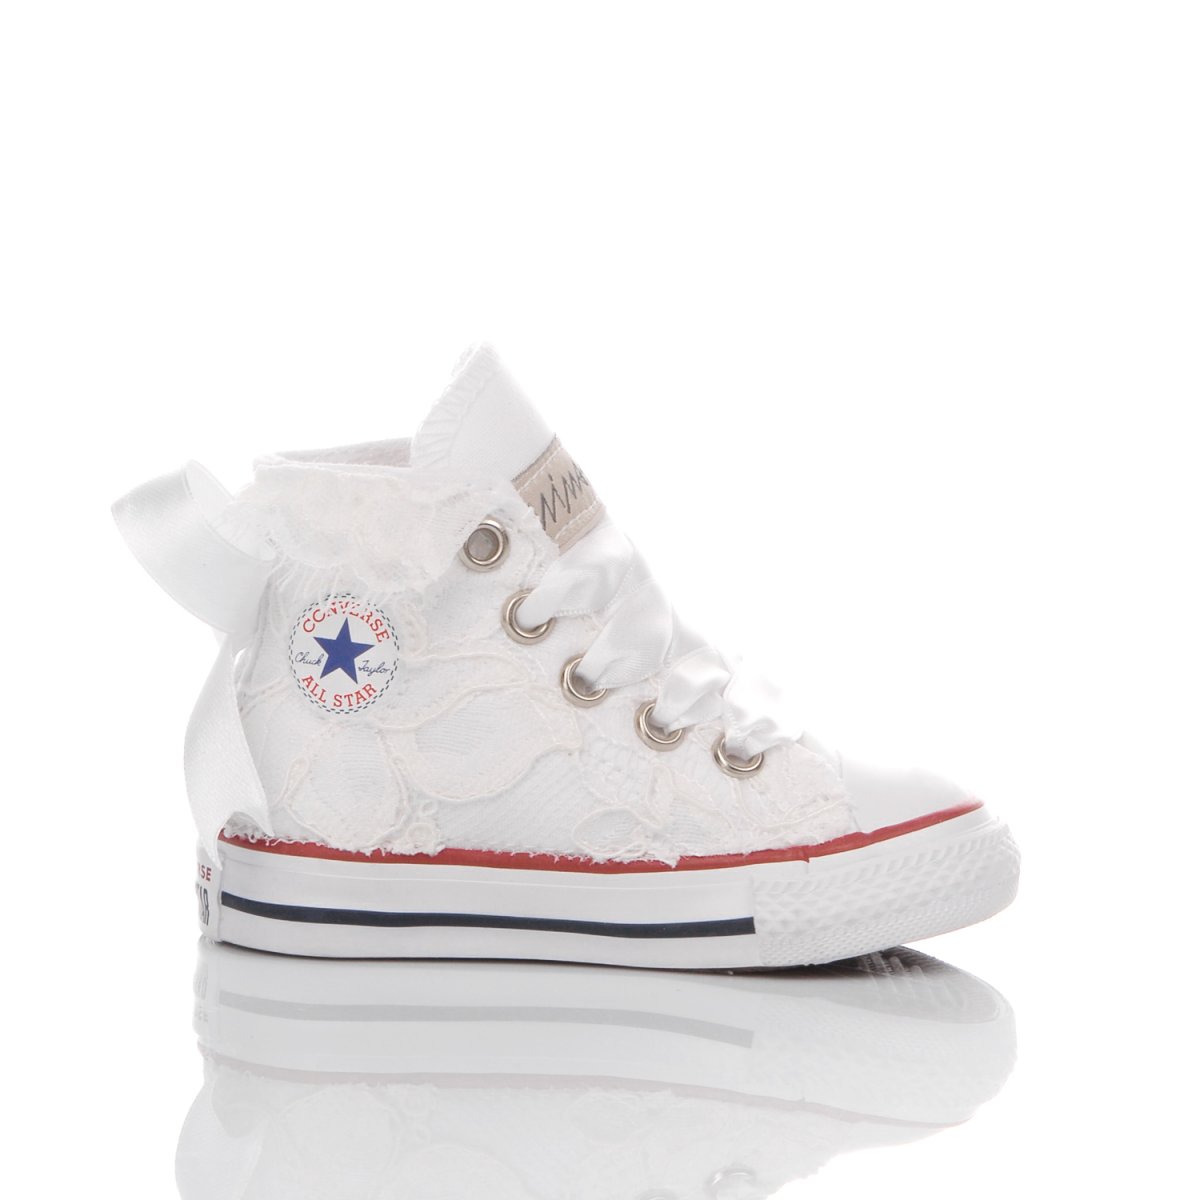 Civilian water the flower ignore Converse Baby Amabel customized mimanera